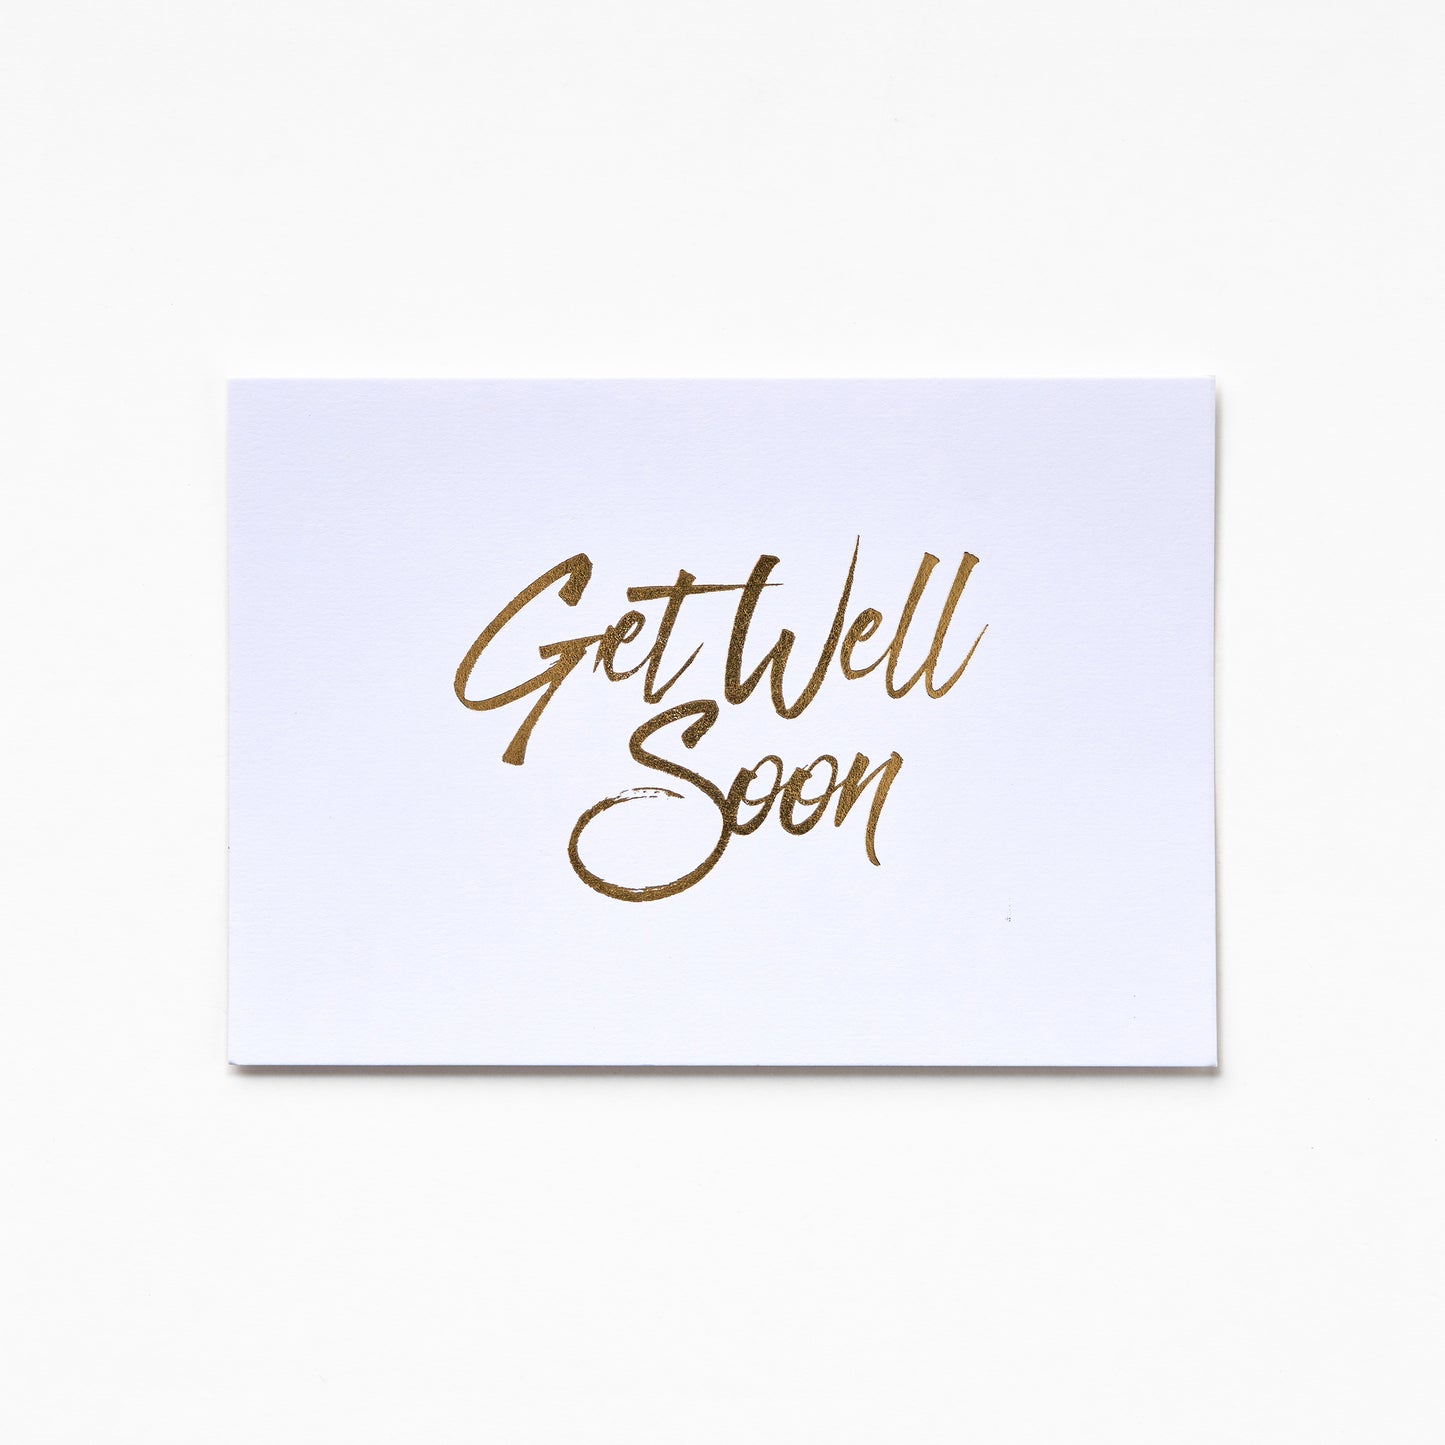 A6 Greeting Card - GET WELL SOON